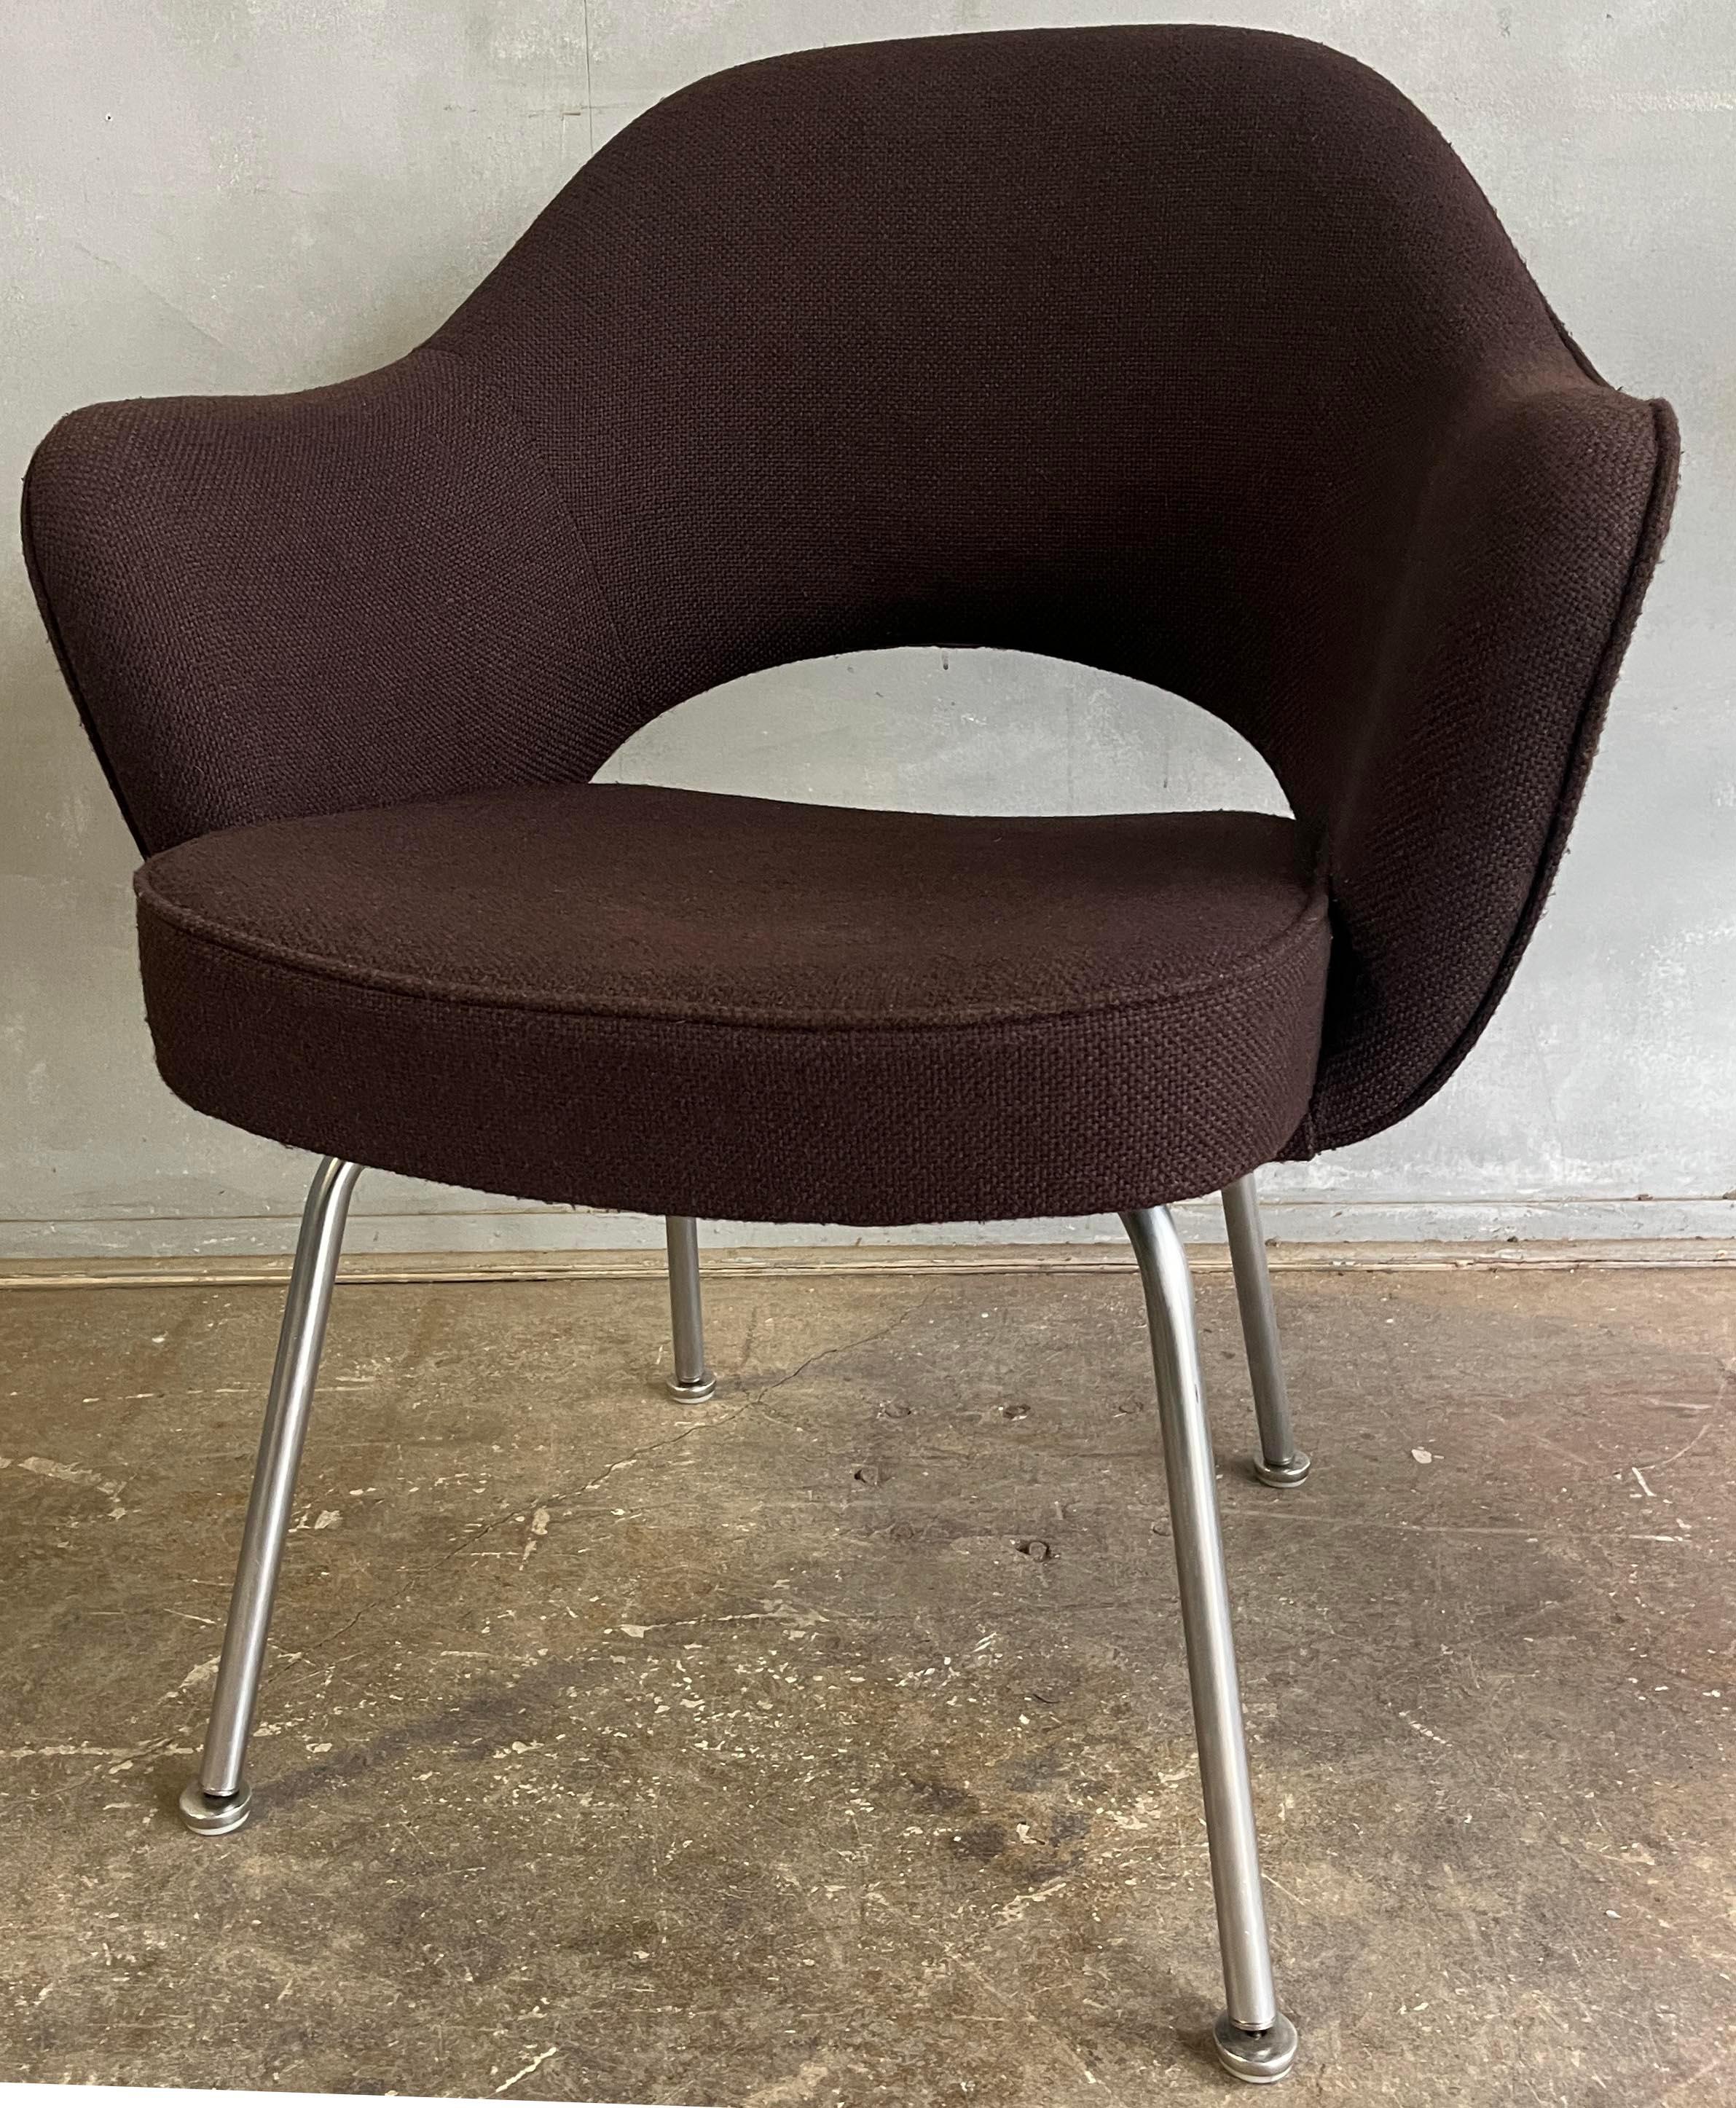 For your consideration is this pair of Eero Saarinen for Knoll executive chairs. With brown fabric and wool upholstery for Knoll. 
These are from the 60's  and have been reupholstered by Citron in the 80's (a company that specialized in recovering